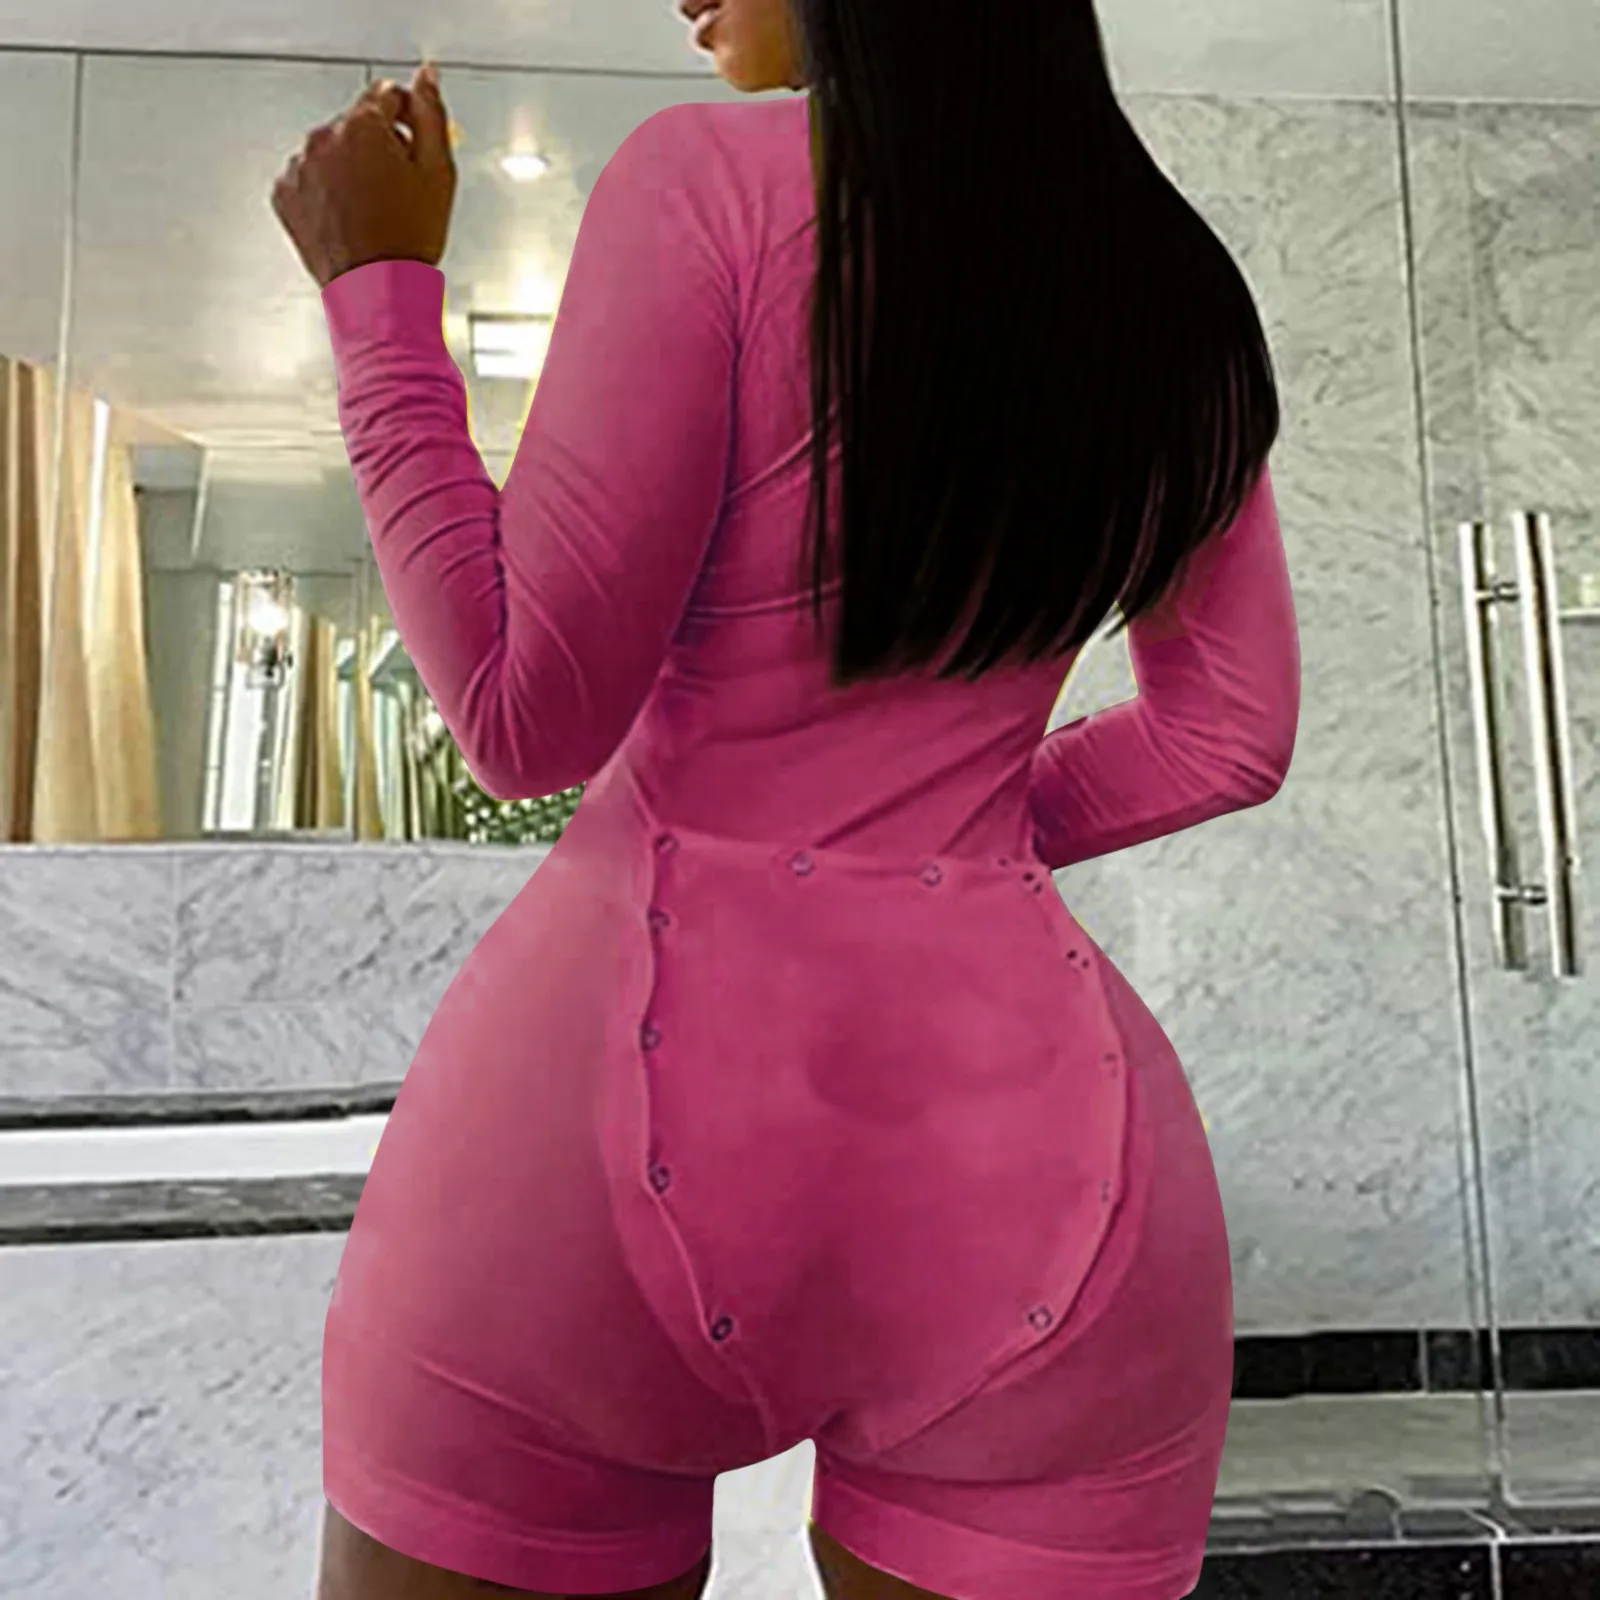 

Pink Long Sleeve One Piece Bodysuit Button Bodycon Solid Color Romper Shorts Stretchy Pajama Playsuit Jumpsuit Womens Onesie